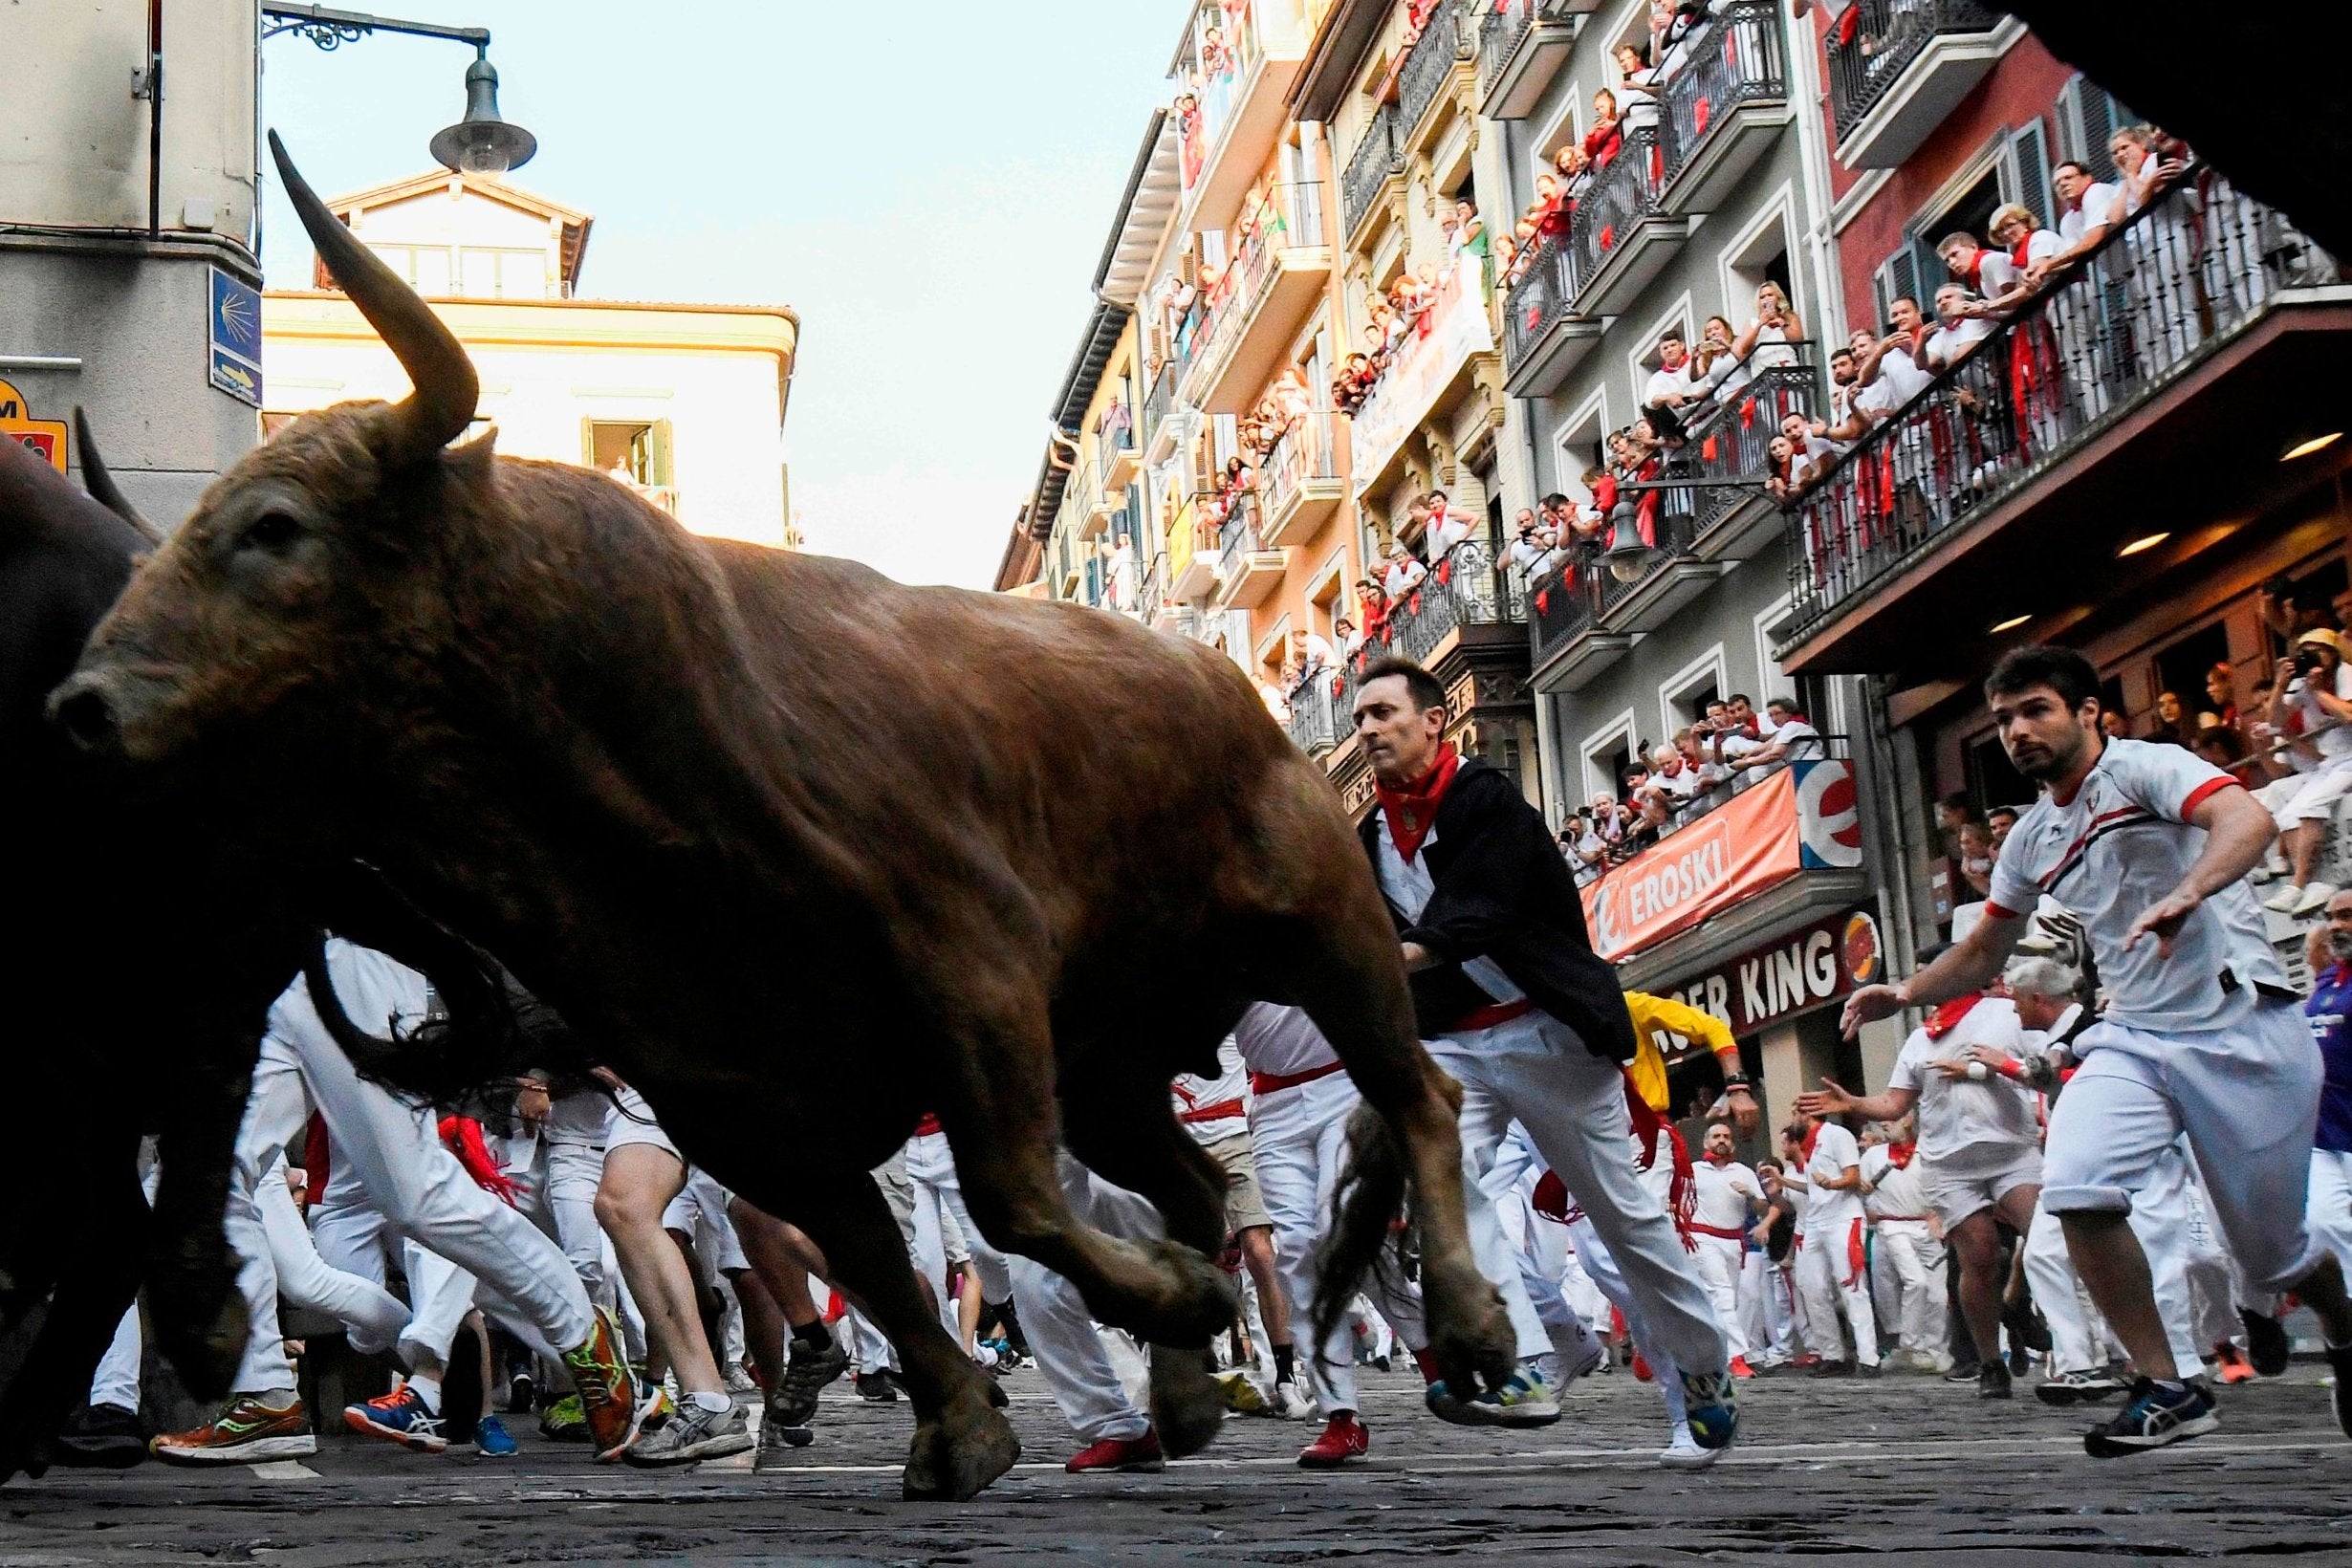 The use of bulls for entertainment is coming under increased scrutiny in Spain (File photo)